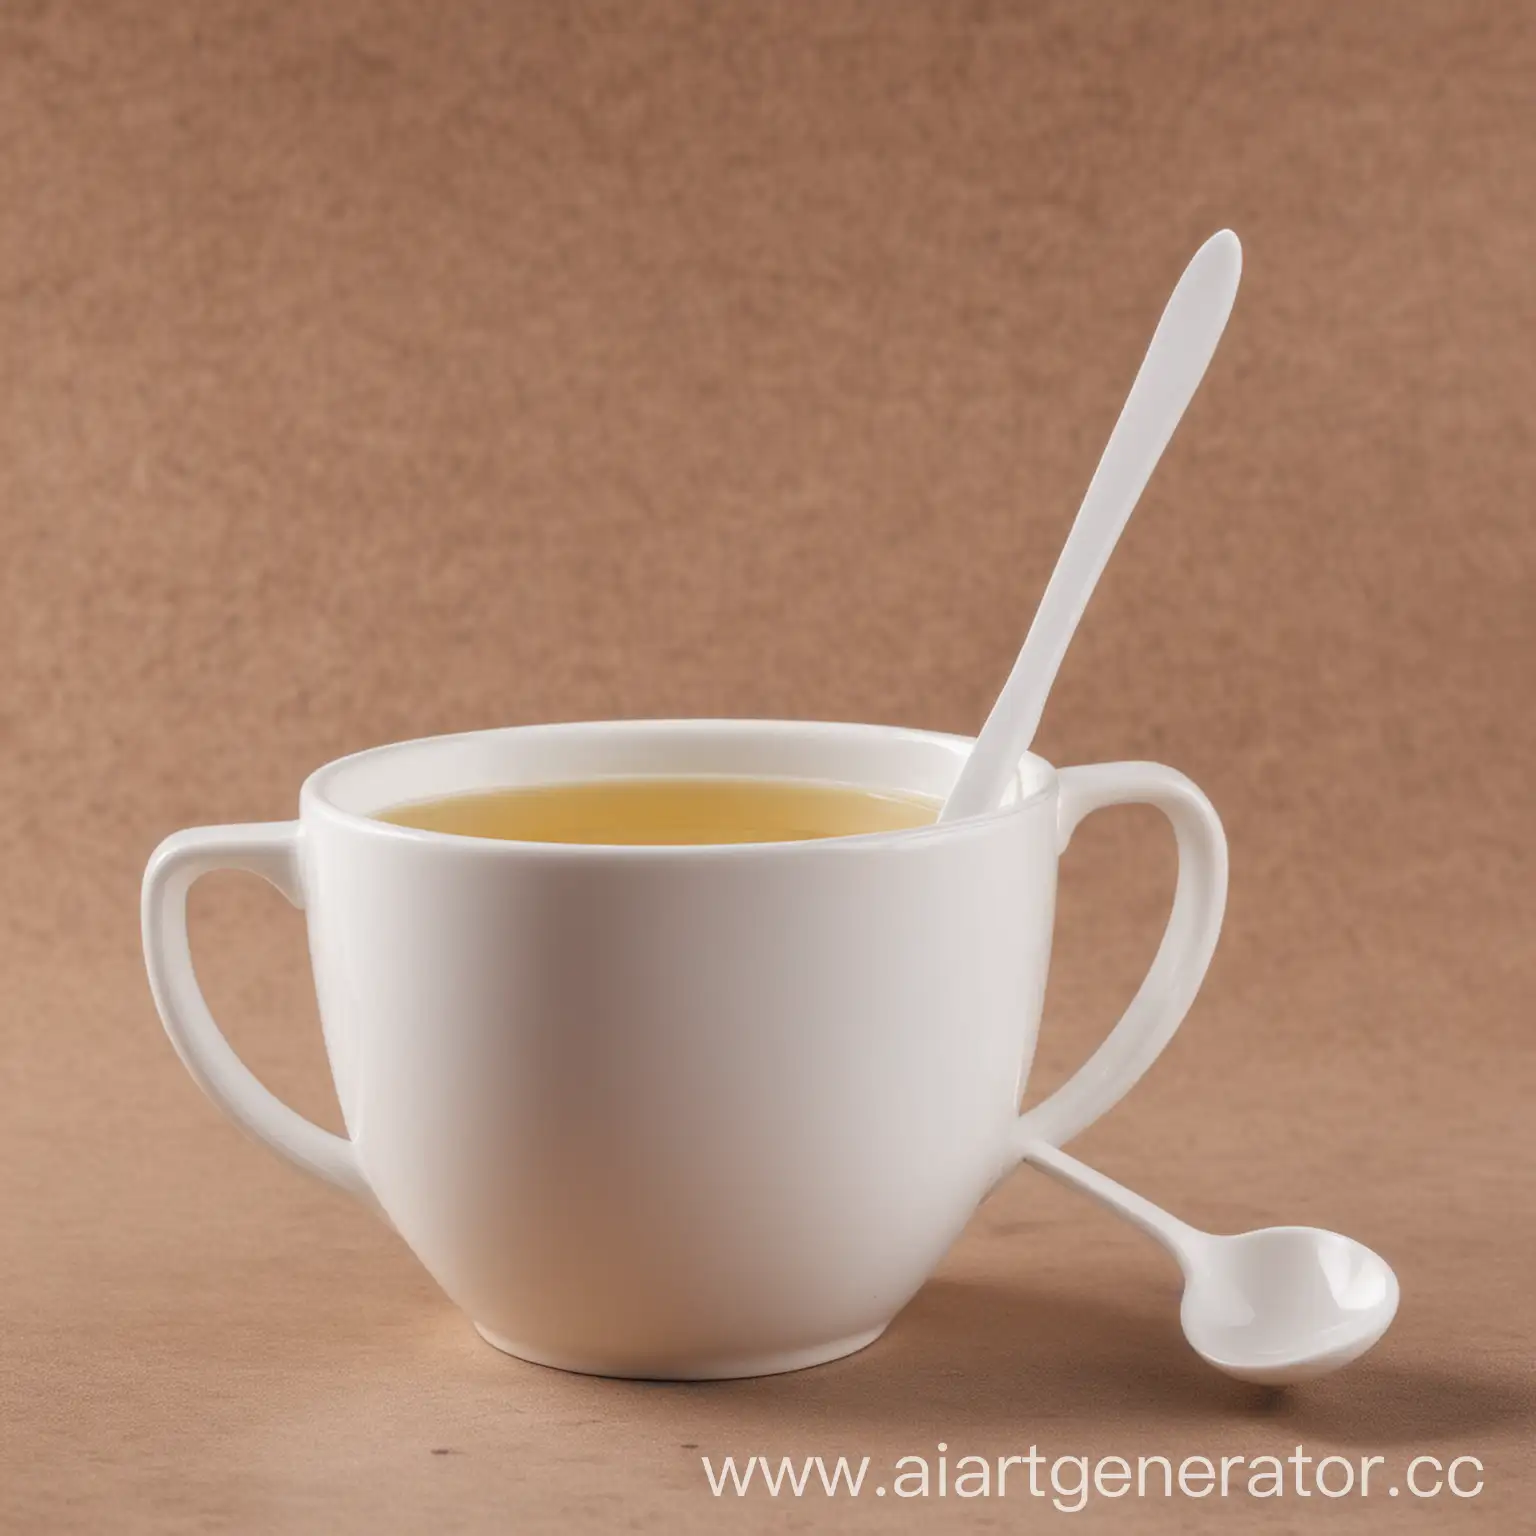 Contrasting-Textures-White-Tea-Spoon-against-Coffee-Mug-Background